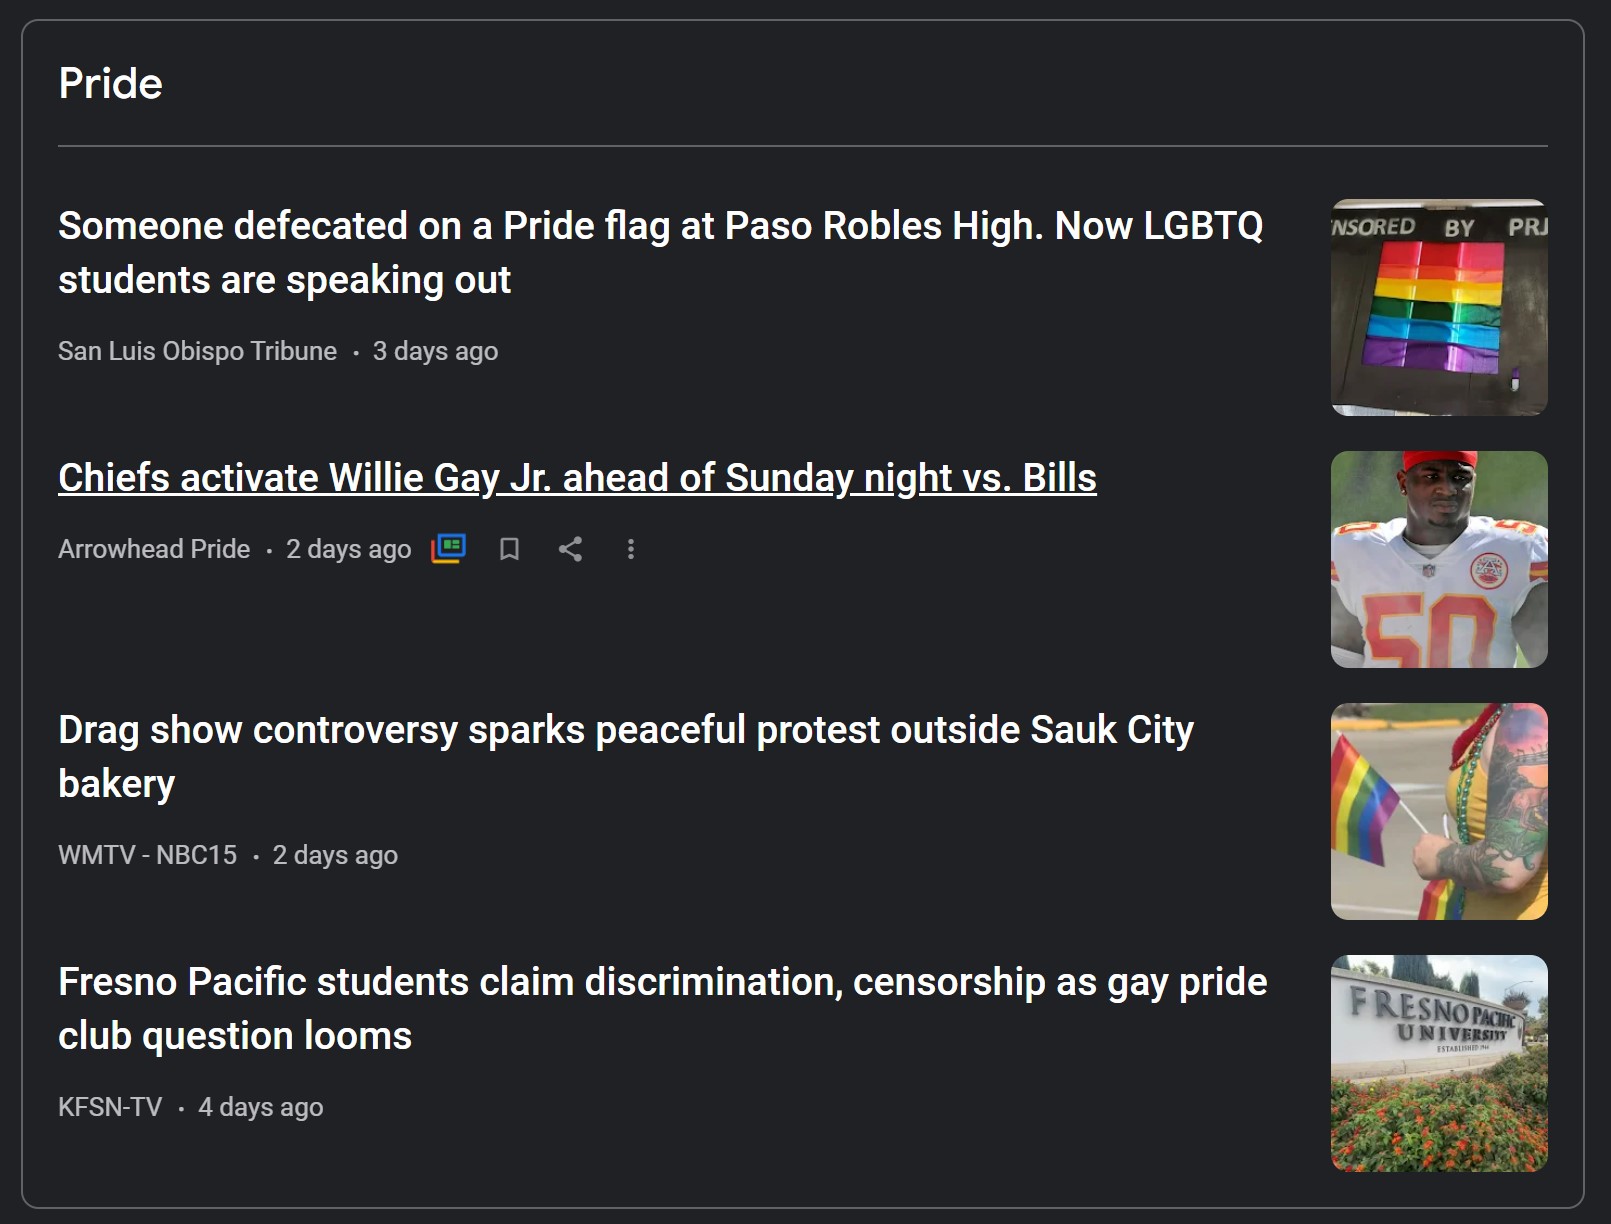 A screenshot of the Google News feed for LGBTQ+ Pride